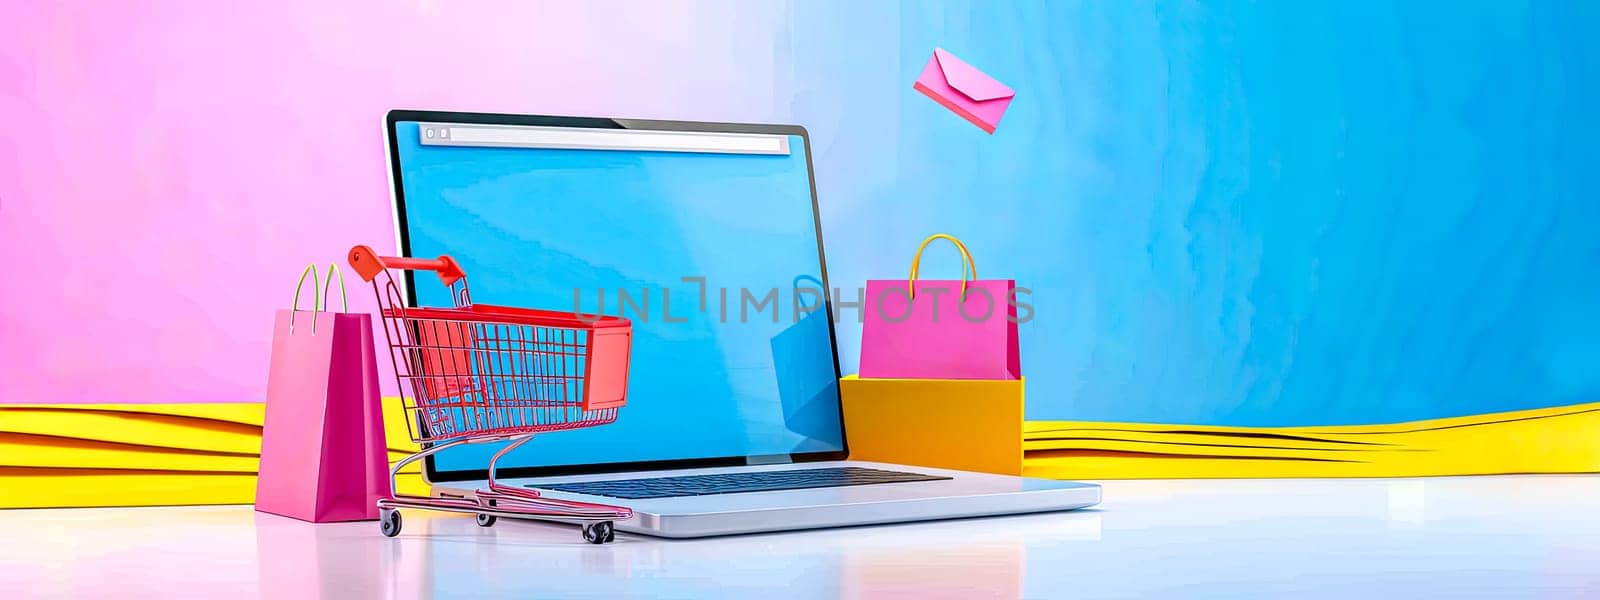 online shopping concept with a shopping cart on a laptop keyboard, indicating e-commerce, flanked by colorful shopping bags against a pastel backdrop.